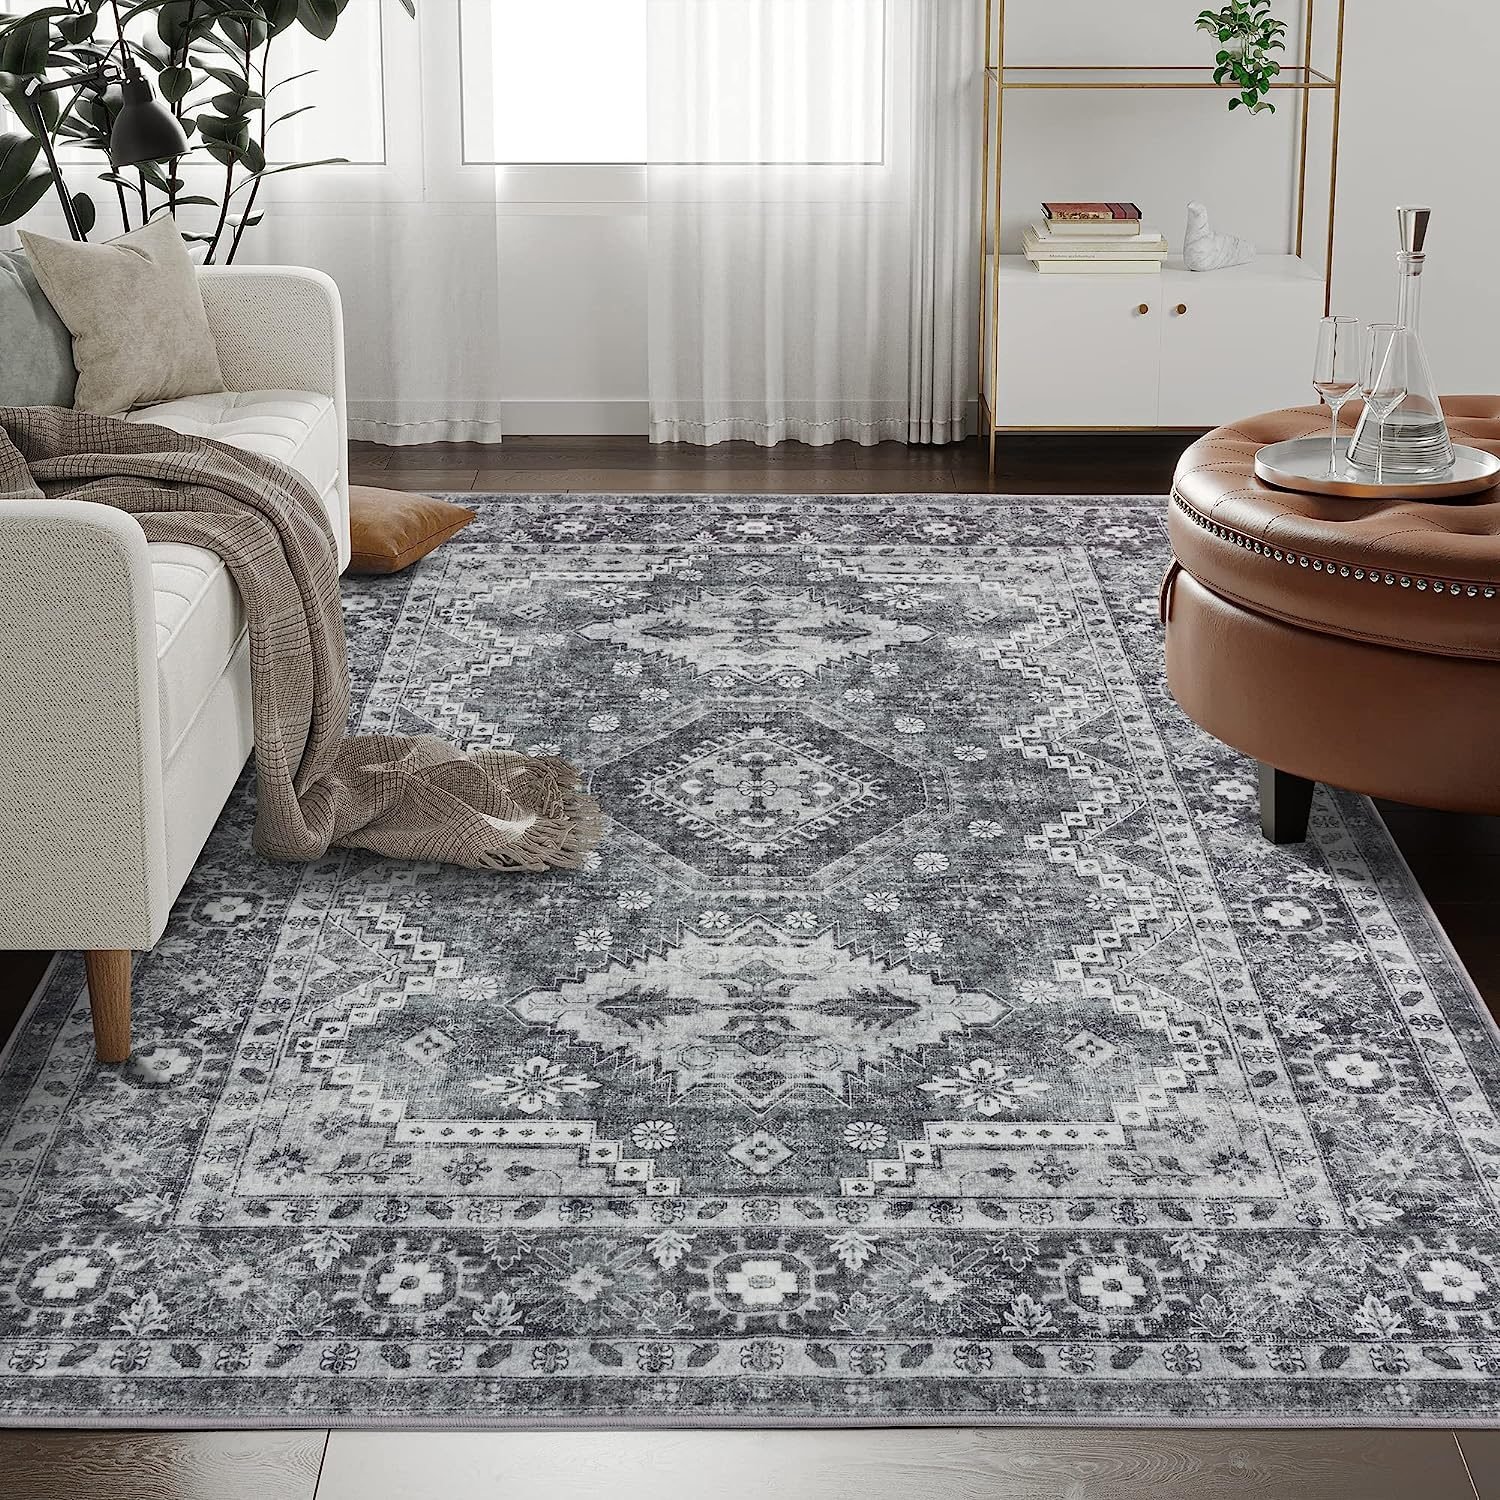 The 10 Best Washable Rugs for Homes With Kids and Pets